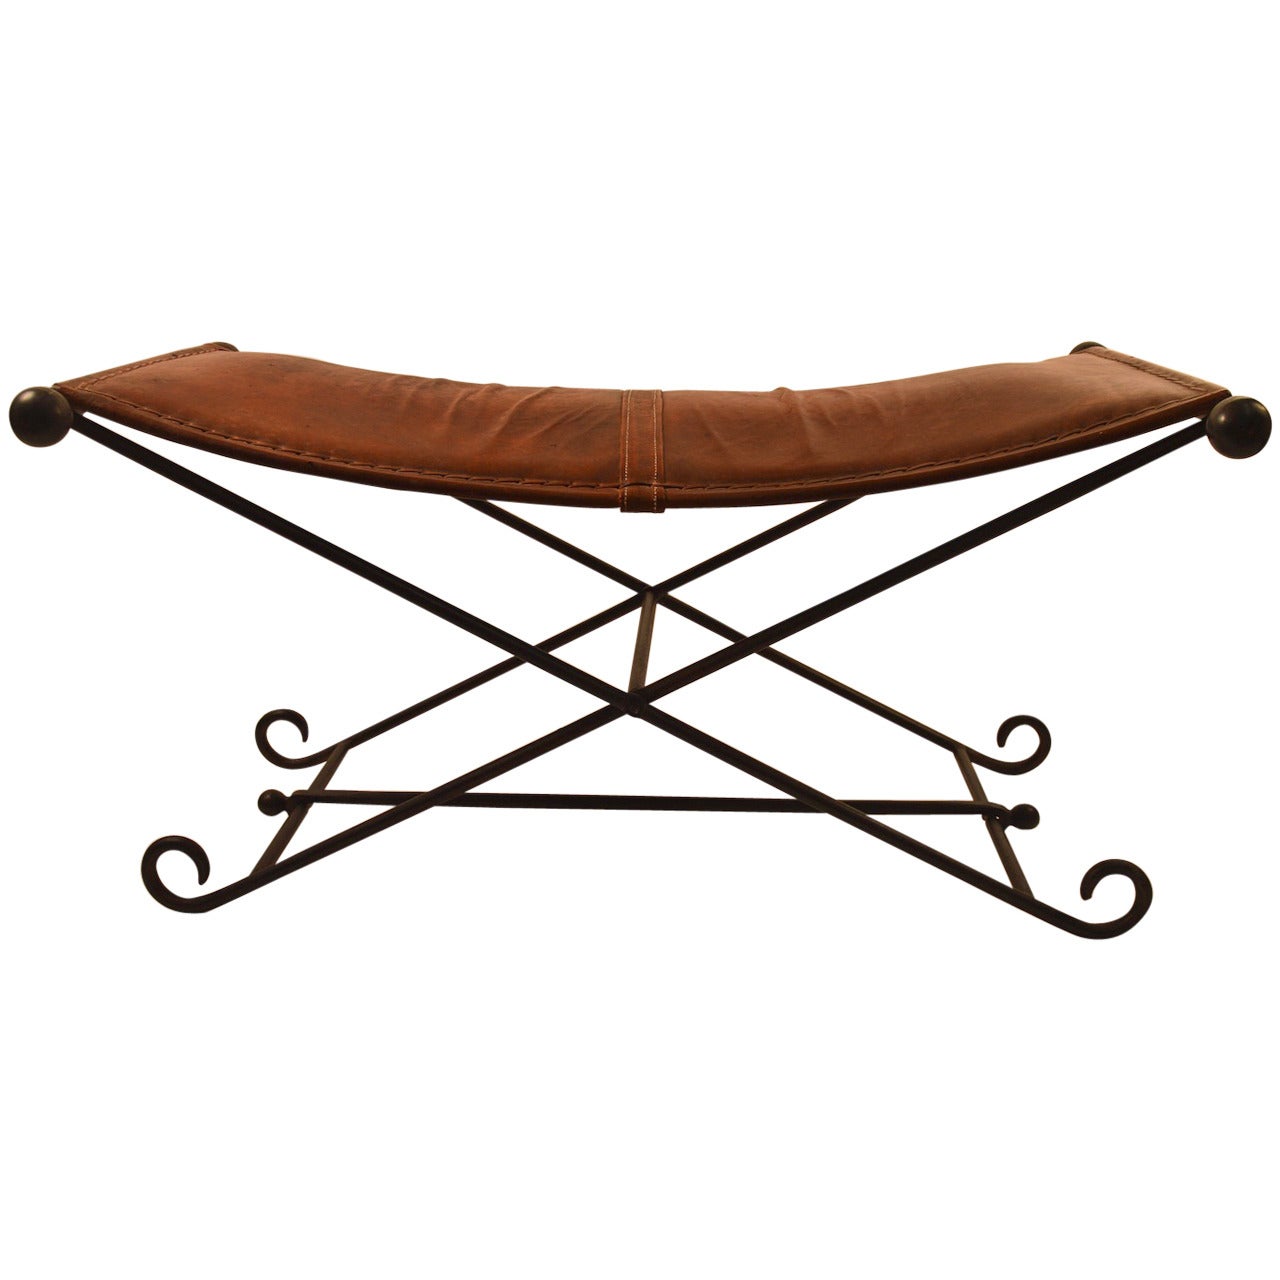 Elegant Wrought Iron and Leather Bench